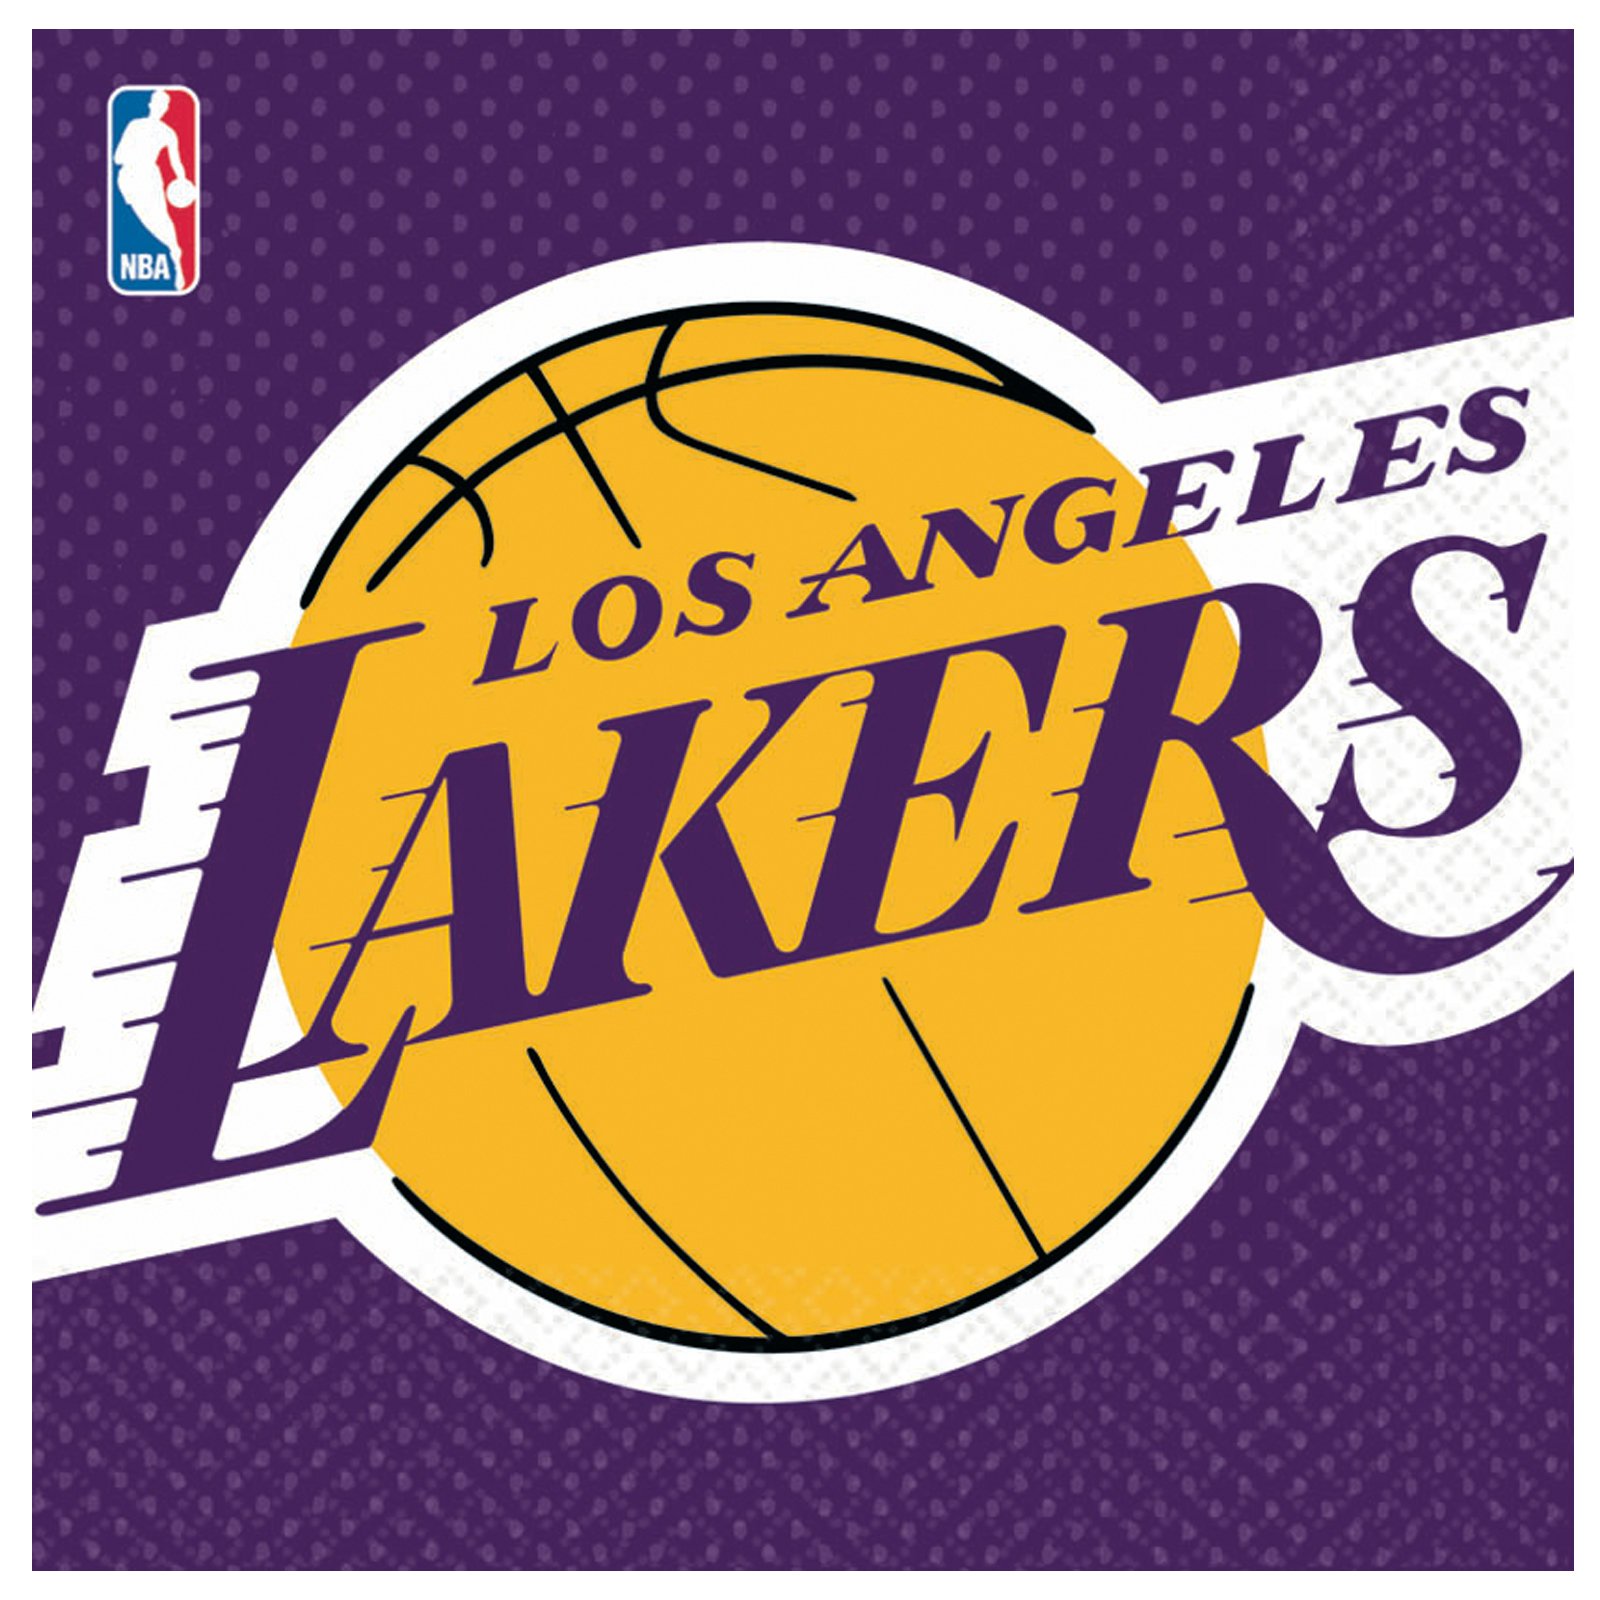 Nice Images Collection: Los Angeles Lakers Desktop Wallpapers